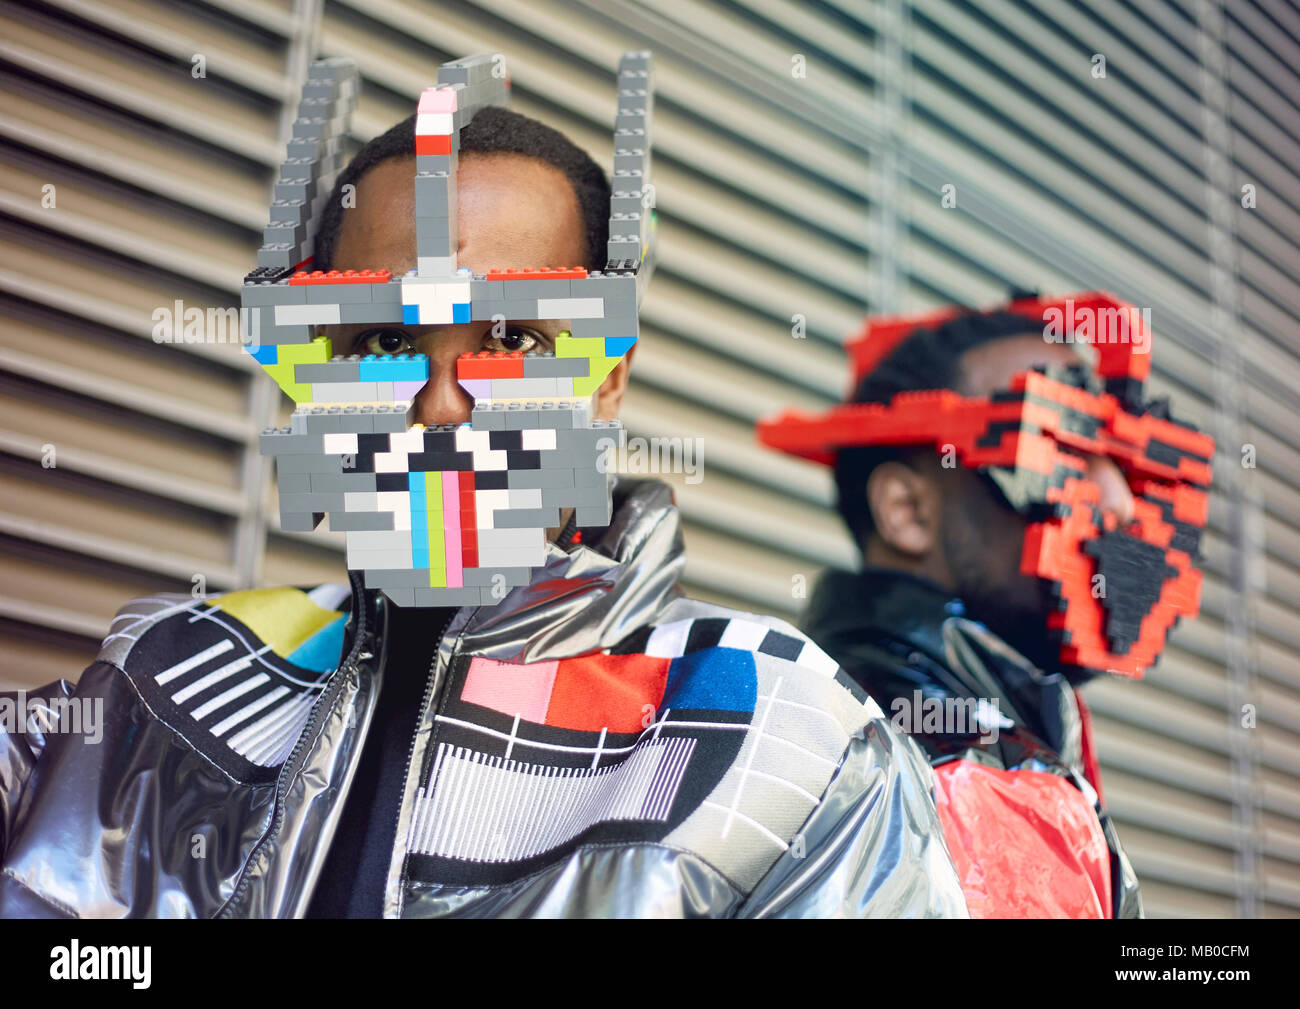 Brothers Peter (left) and Paul Allimadi wearing jackets by L4L Clothing and lego masks by Bwoywonder as they attend London Fashion Week. Stock Photo